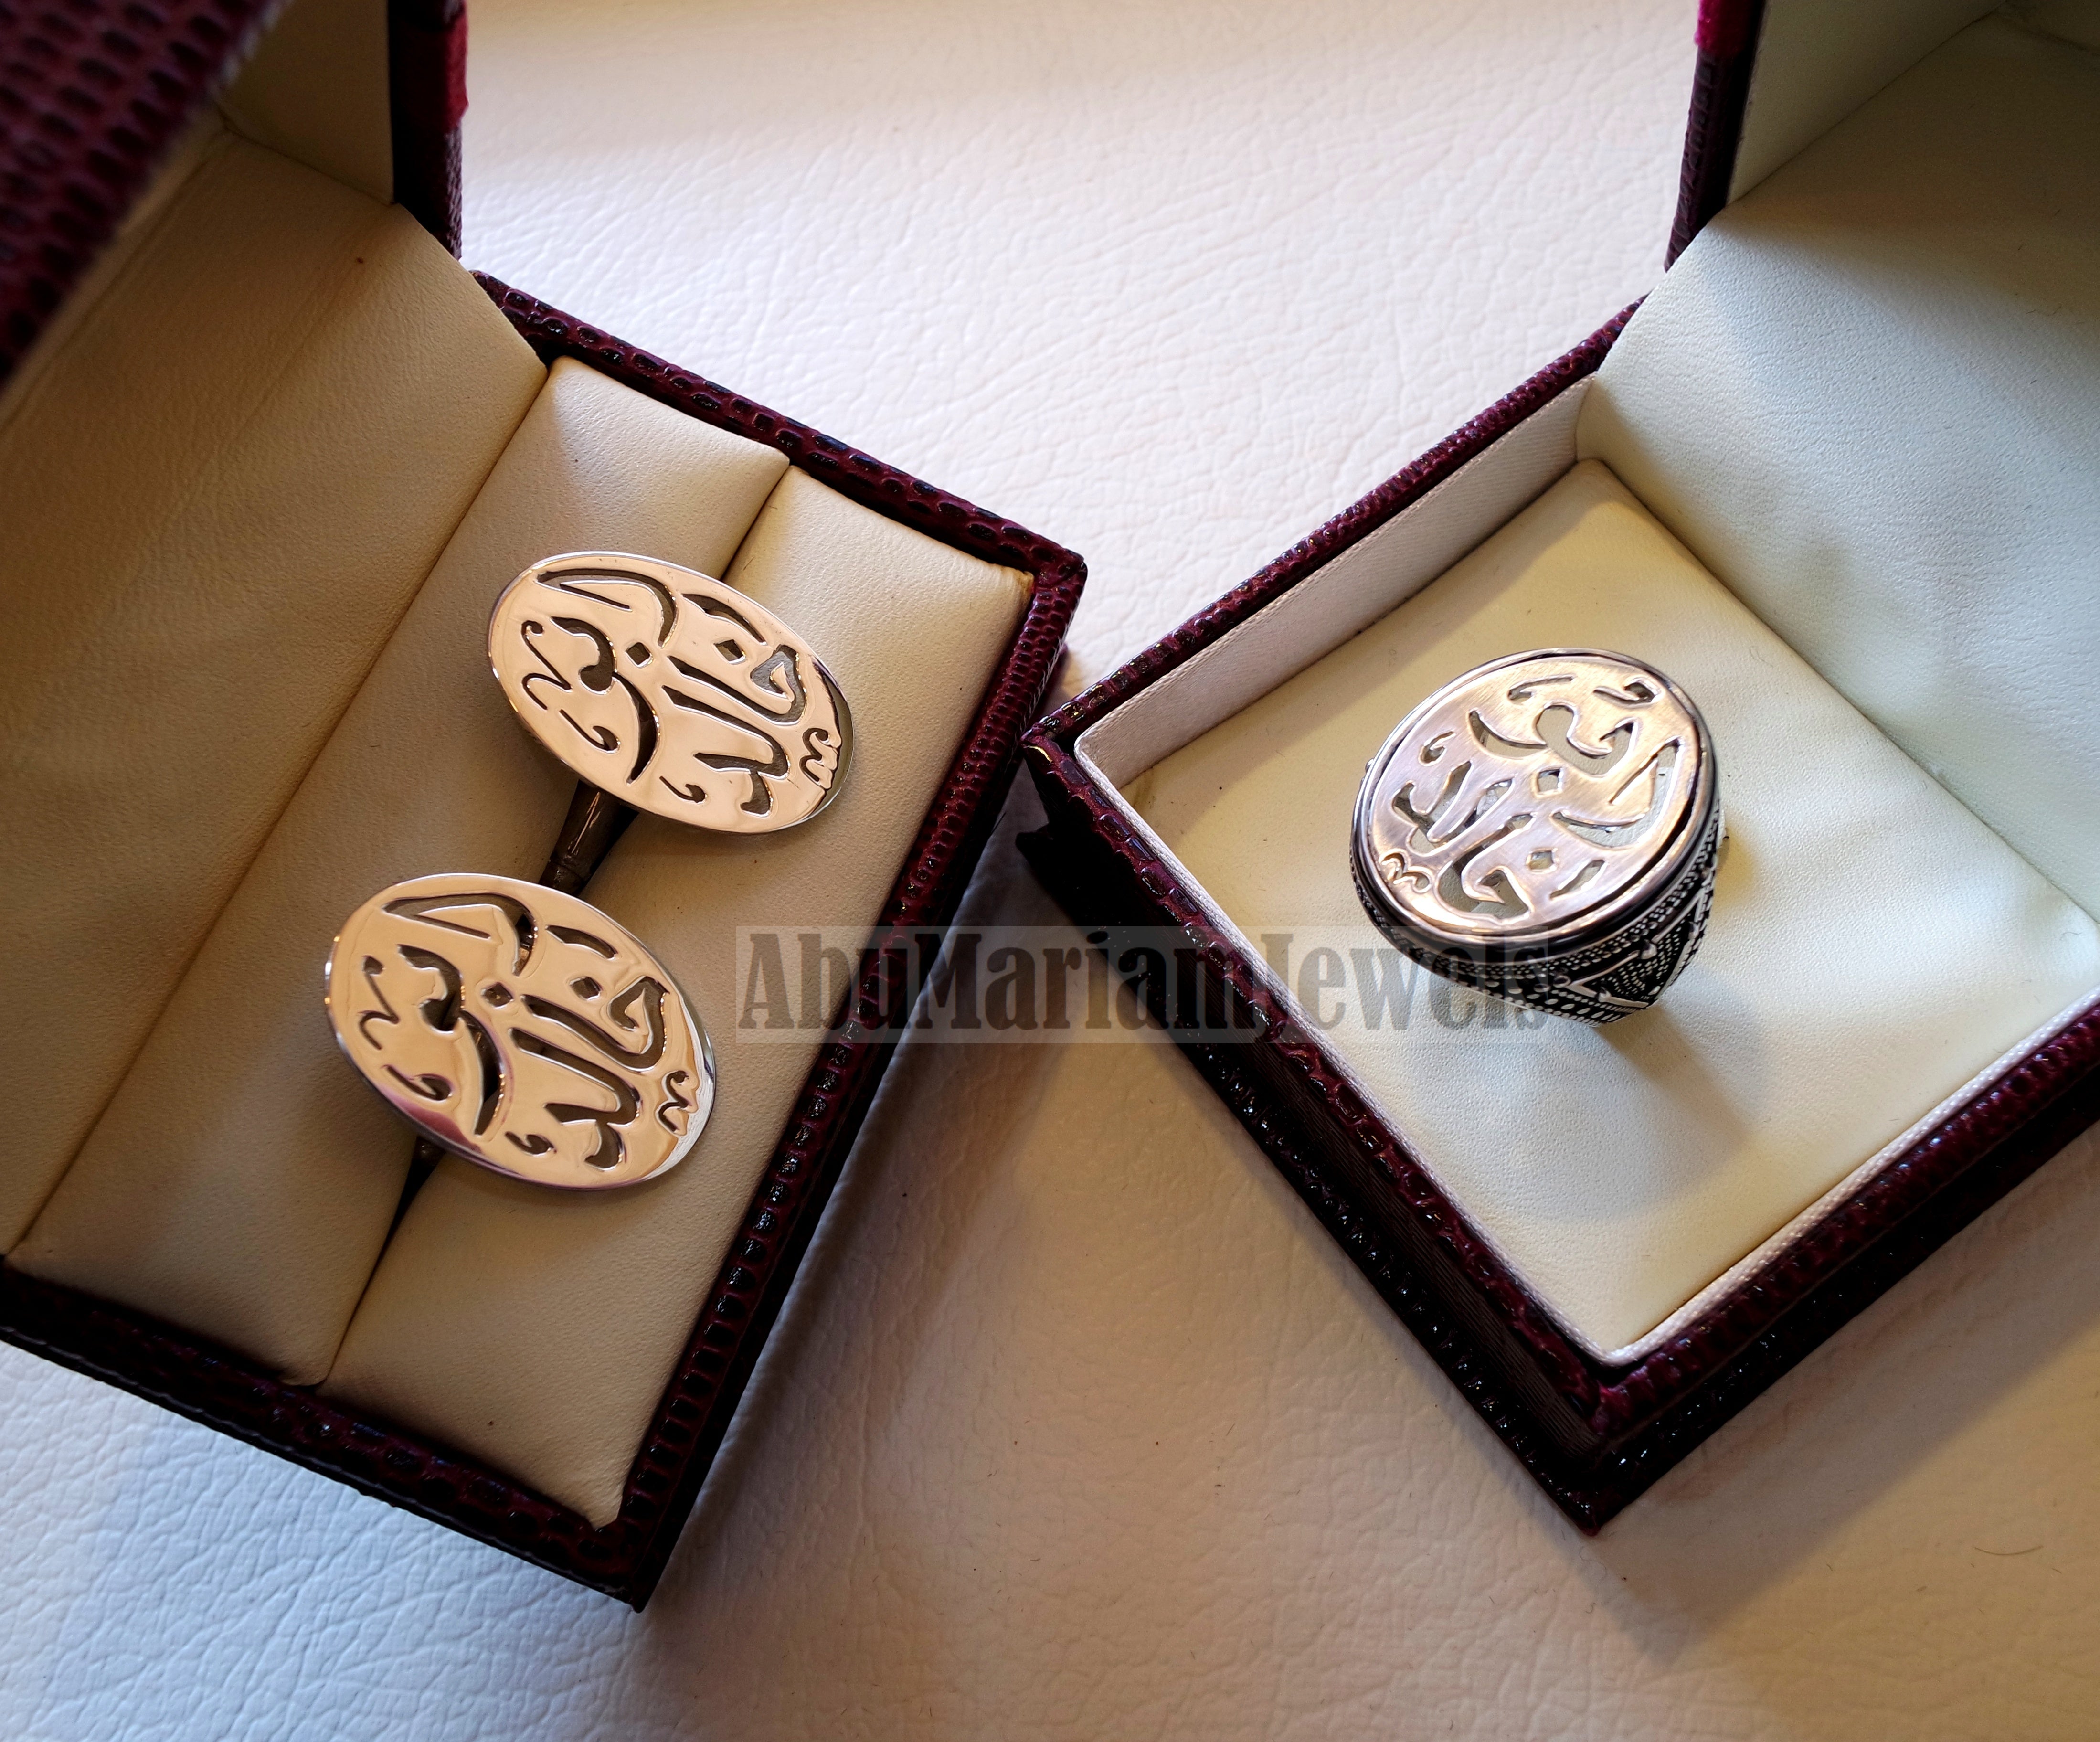 Man set , cufflinks and ring name of two words each calligraphy arabic customized made to order sterling silver 925 heavy men jewelry MS001